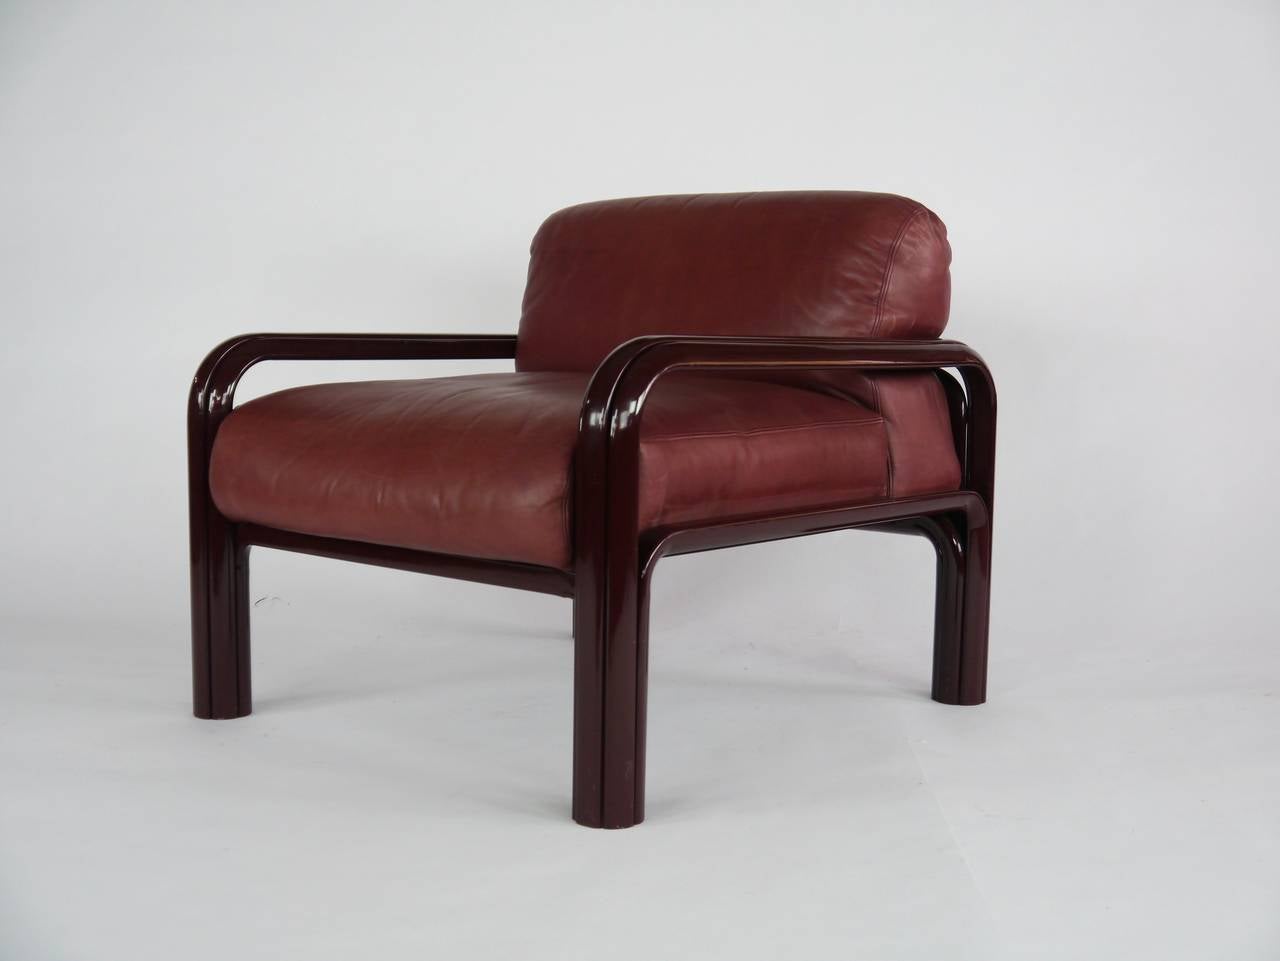 Italian Lounge chairs in Oxblood leather by Gae Aulenti for Knoll